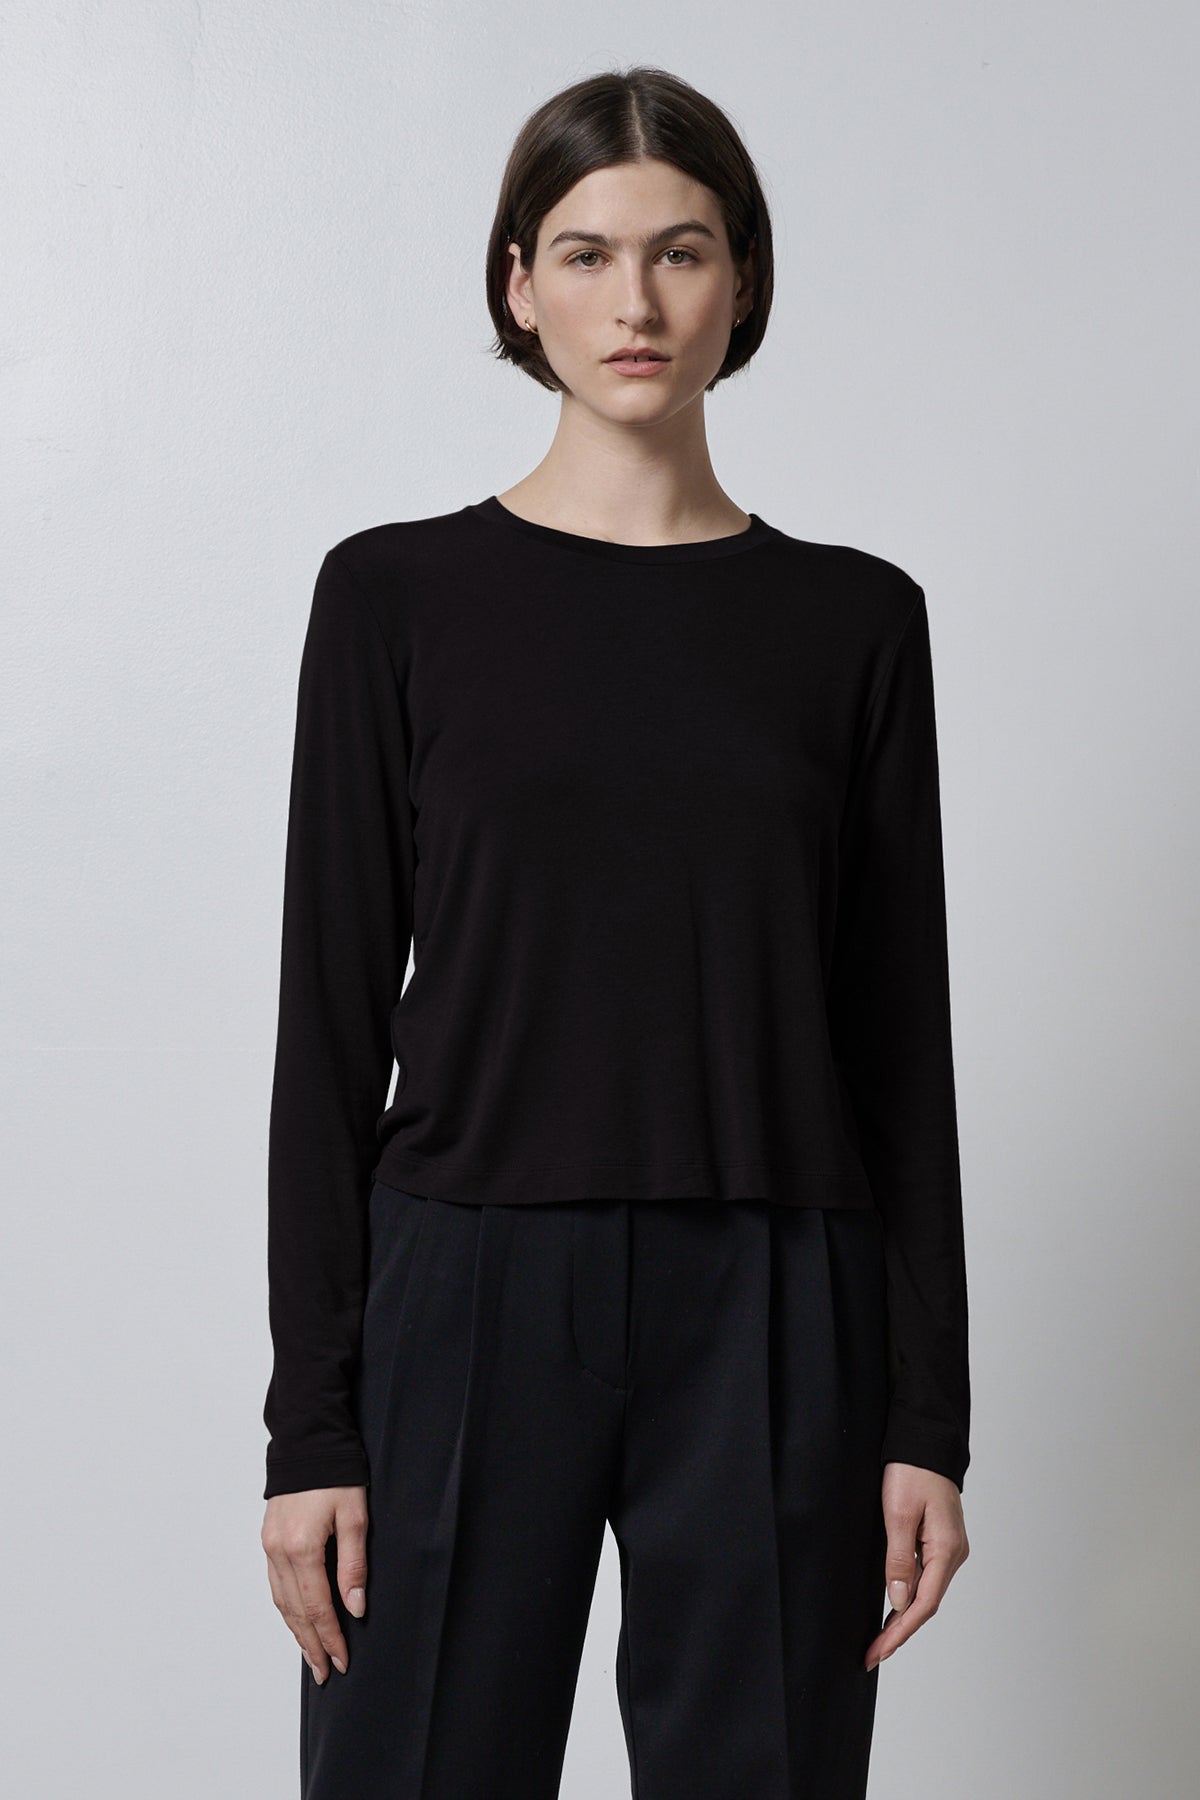 The model is wearing a black Velvet by Jenny Graham rib knit long sleeved top and stretch trousers.-35416710086849